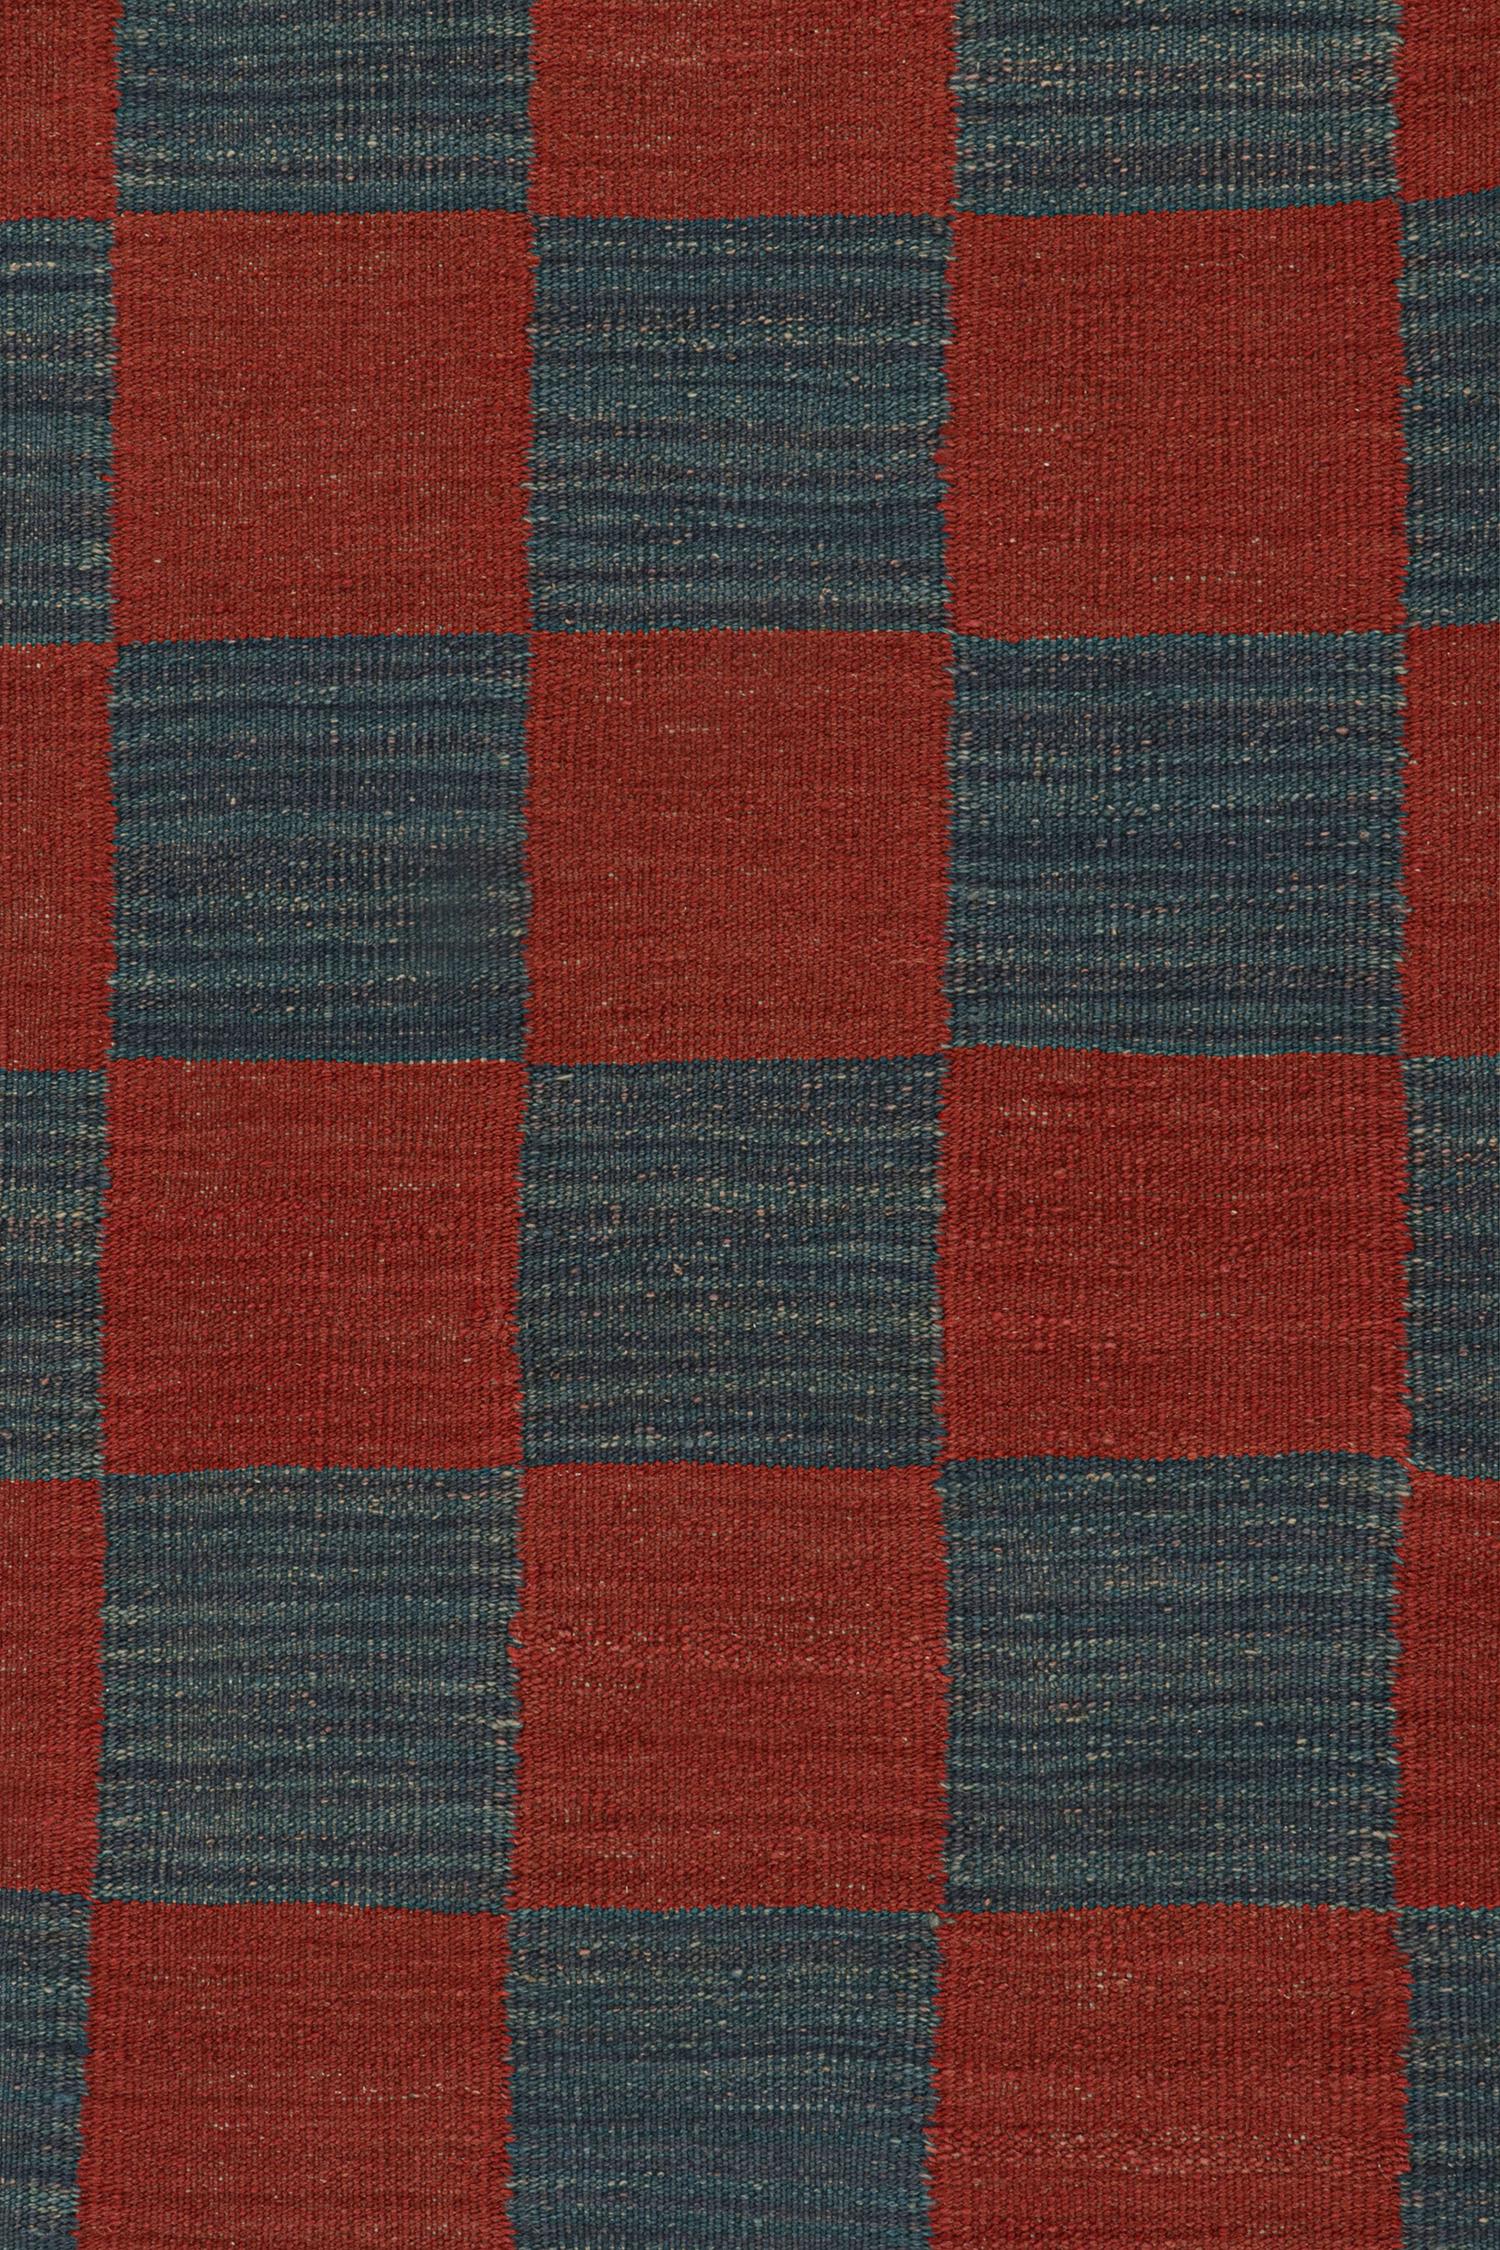 Mid-20th Century Vintage Persian Kilim Runner in Red & Blue Checkerboard Pattern by Rug & Kilim For Sale